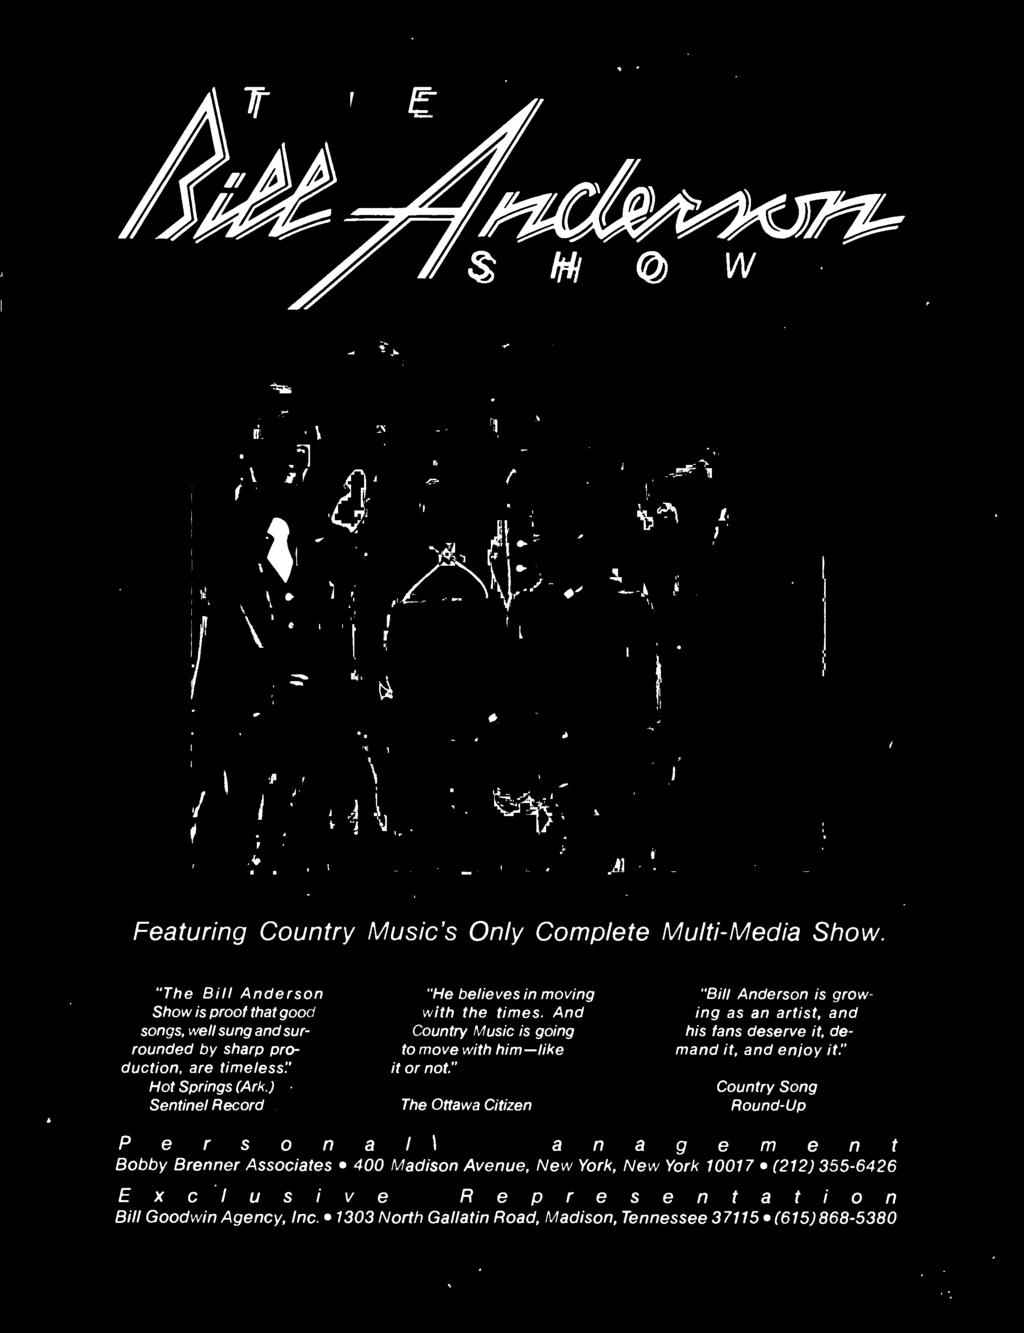 1303 North Gallatin Road, Madison "Bill Anderson is growing as an artist and his fans deserve it demand it, and